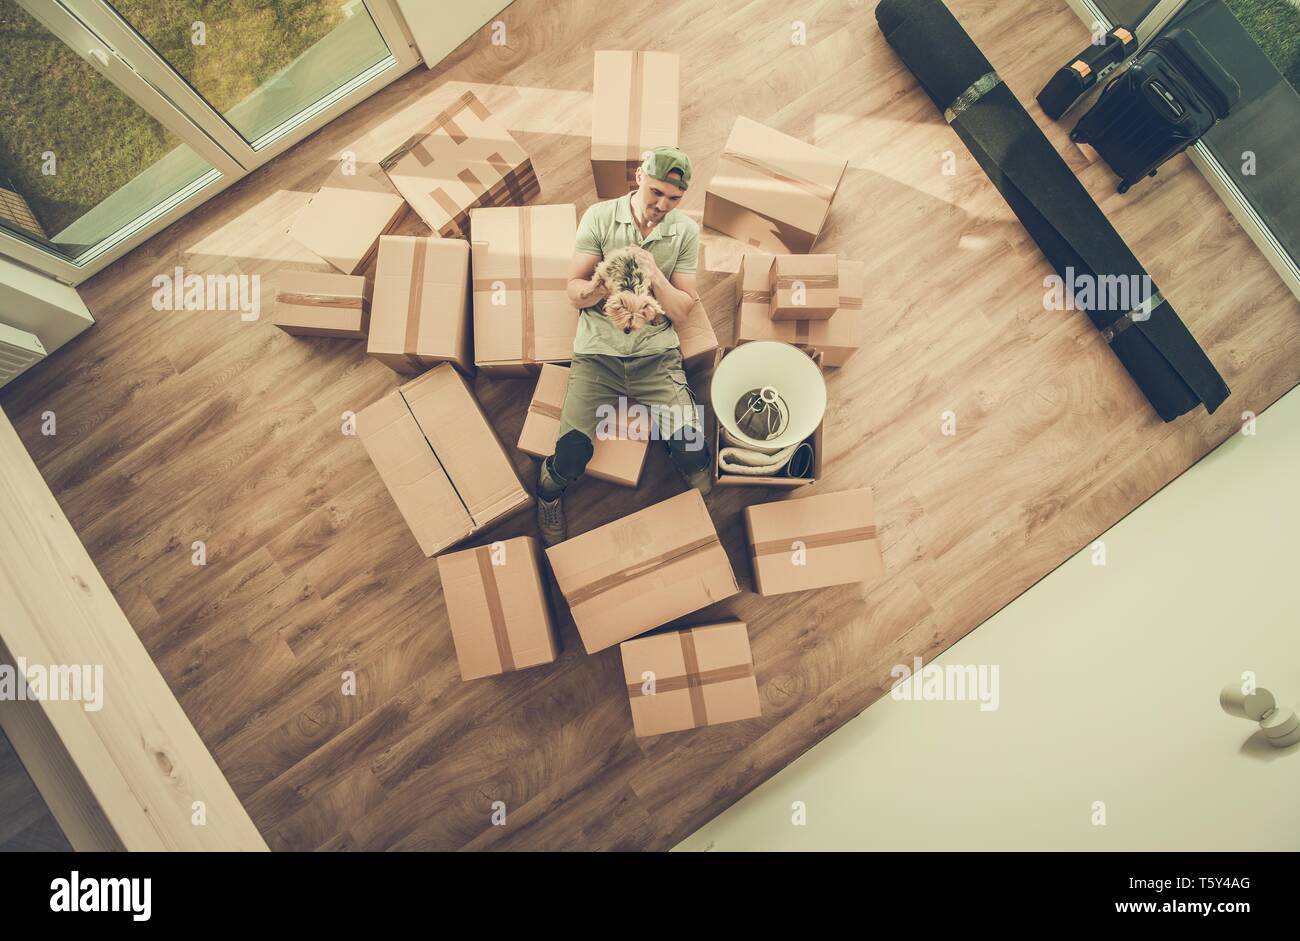 Single Men with Dog Moving In. Caucasian Men Between Moving Cardboard Boxes Filled with Personal Stuff and the Australian Silky Terrier in His Hand. H Stock Photo